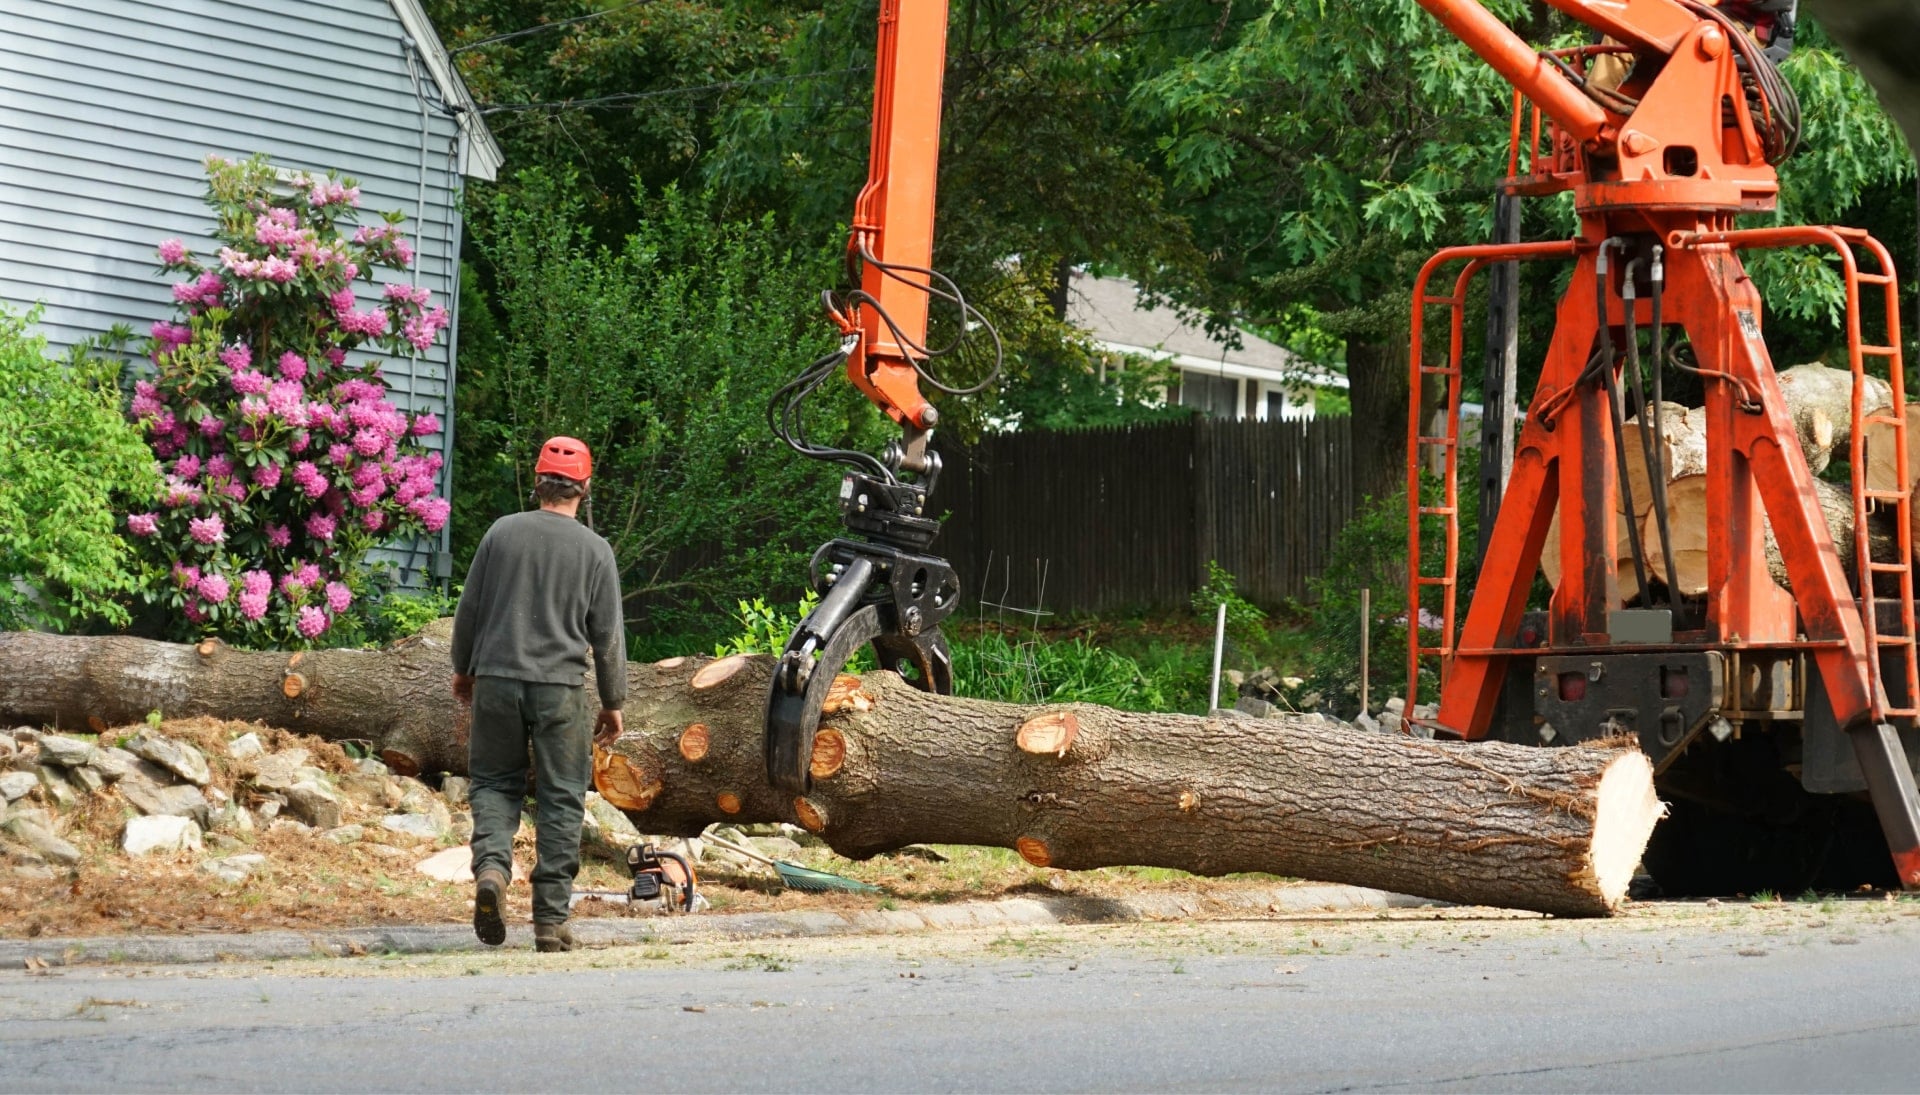 Local partner for Tree removal services in Costa Mesa